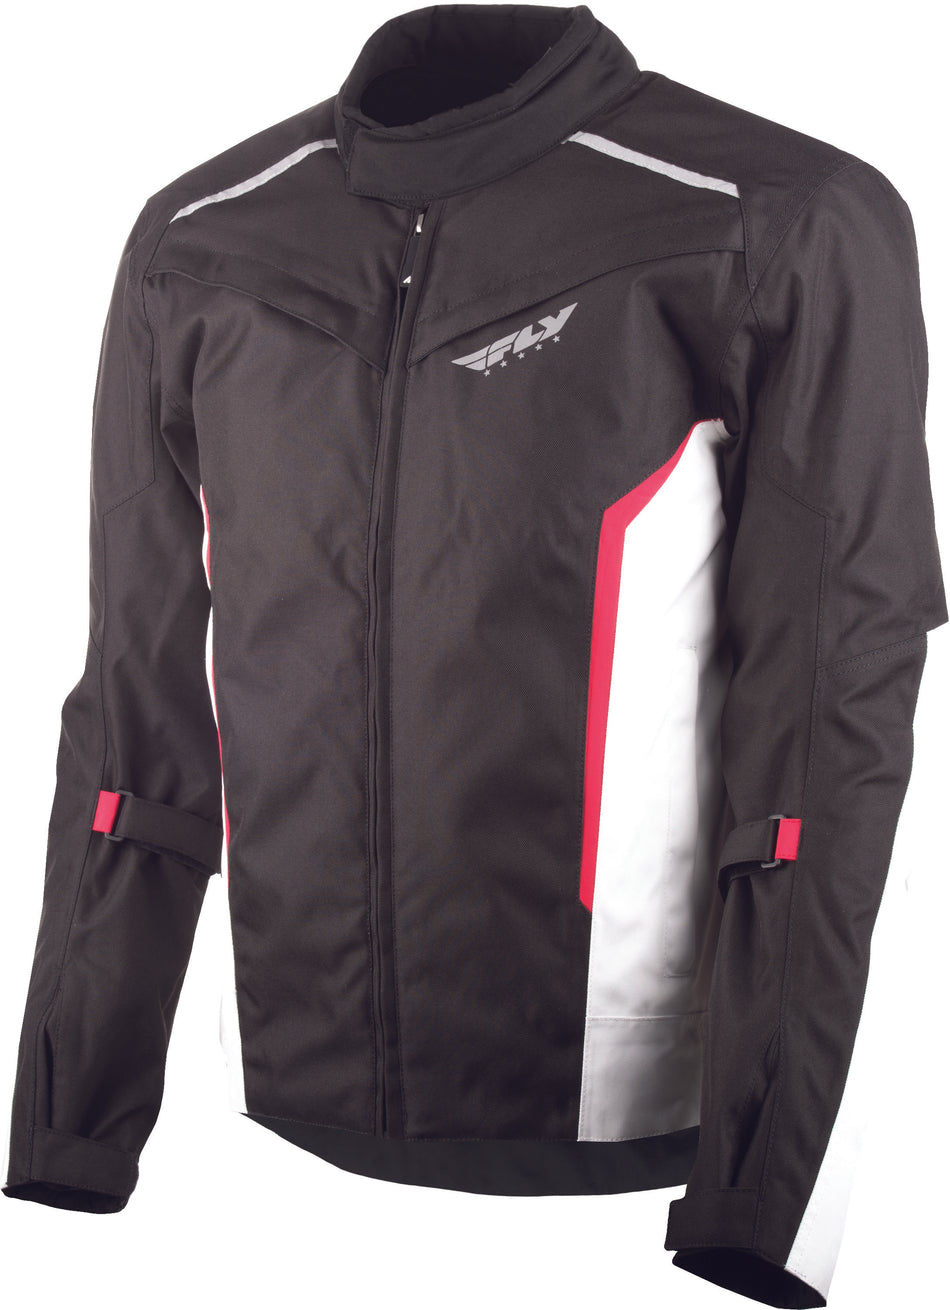 FLY RACING Baseline Jacket Black/White/Red 4x #5958 477-2091~8